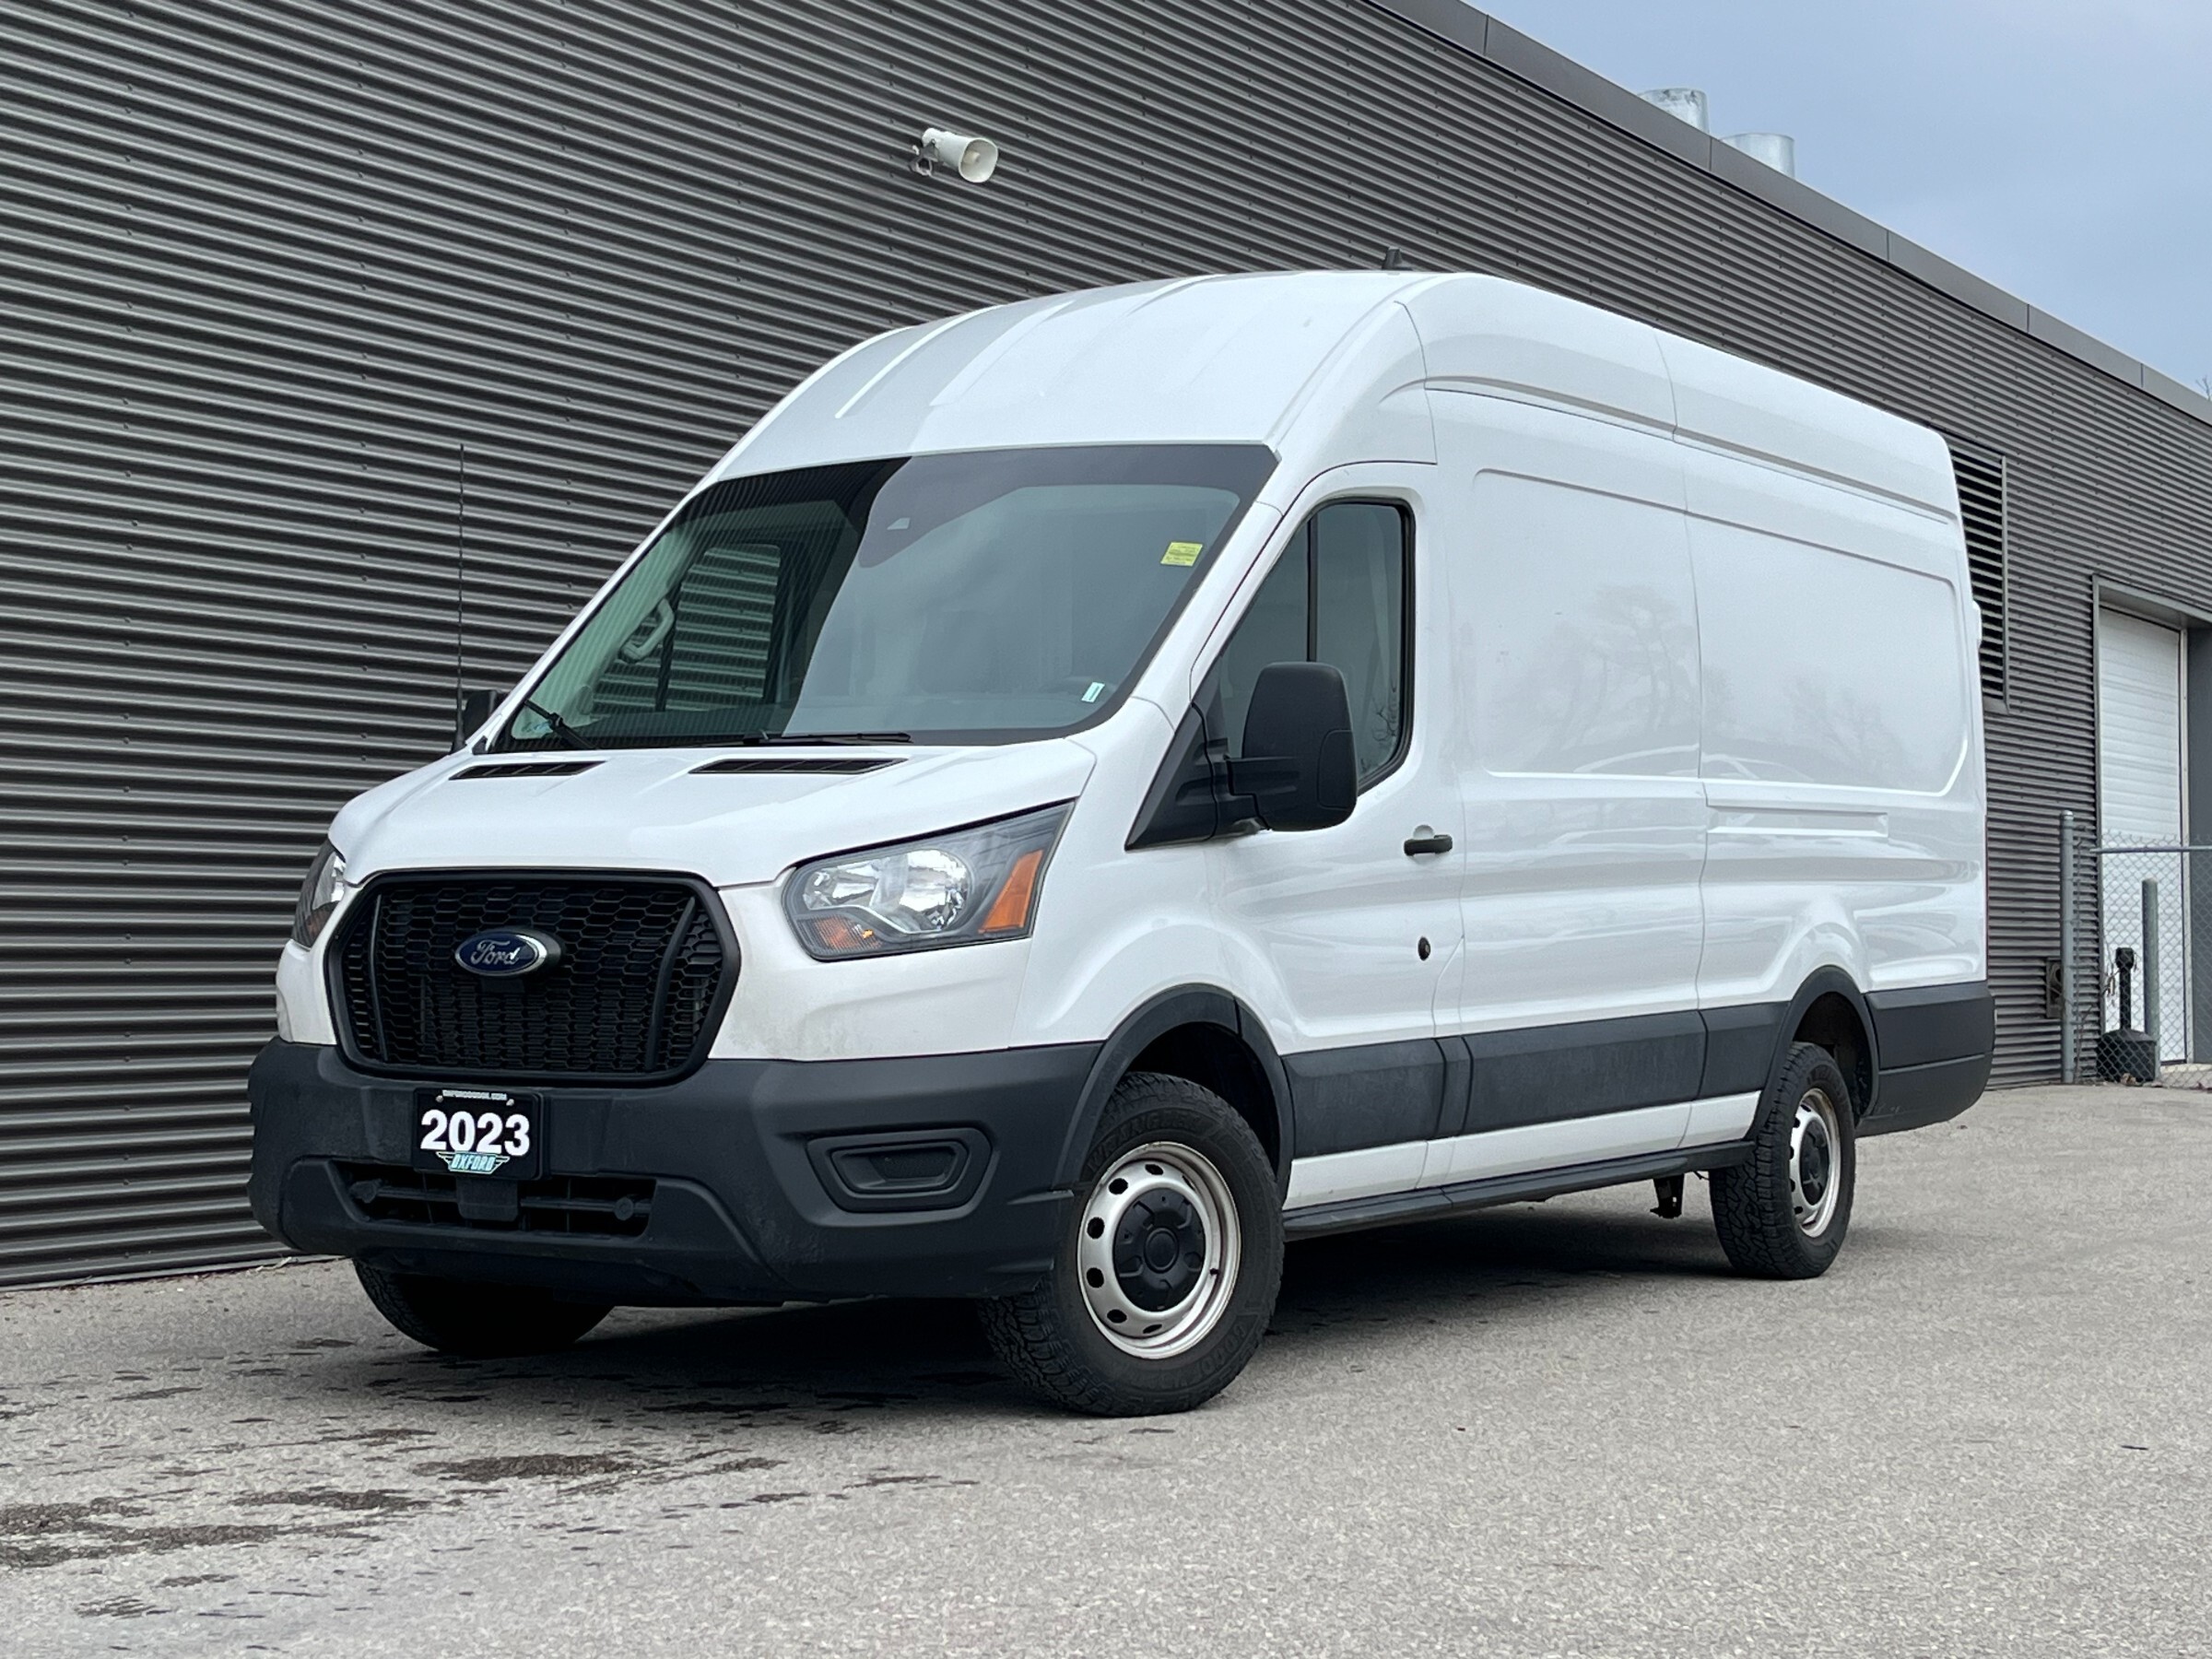 2023 Ford Transit Cargo Van RARE FIND, IDEAL WORK VEHICLE FOR ANY BUSINESS